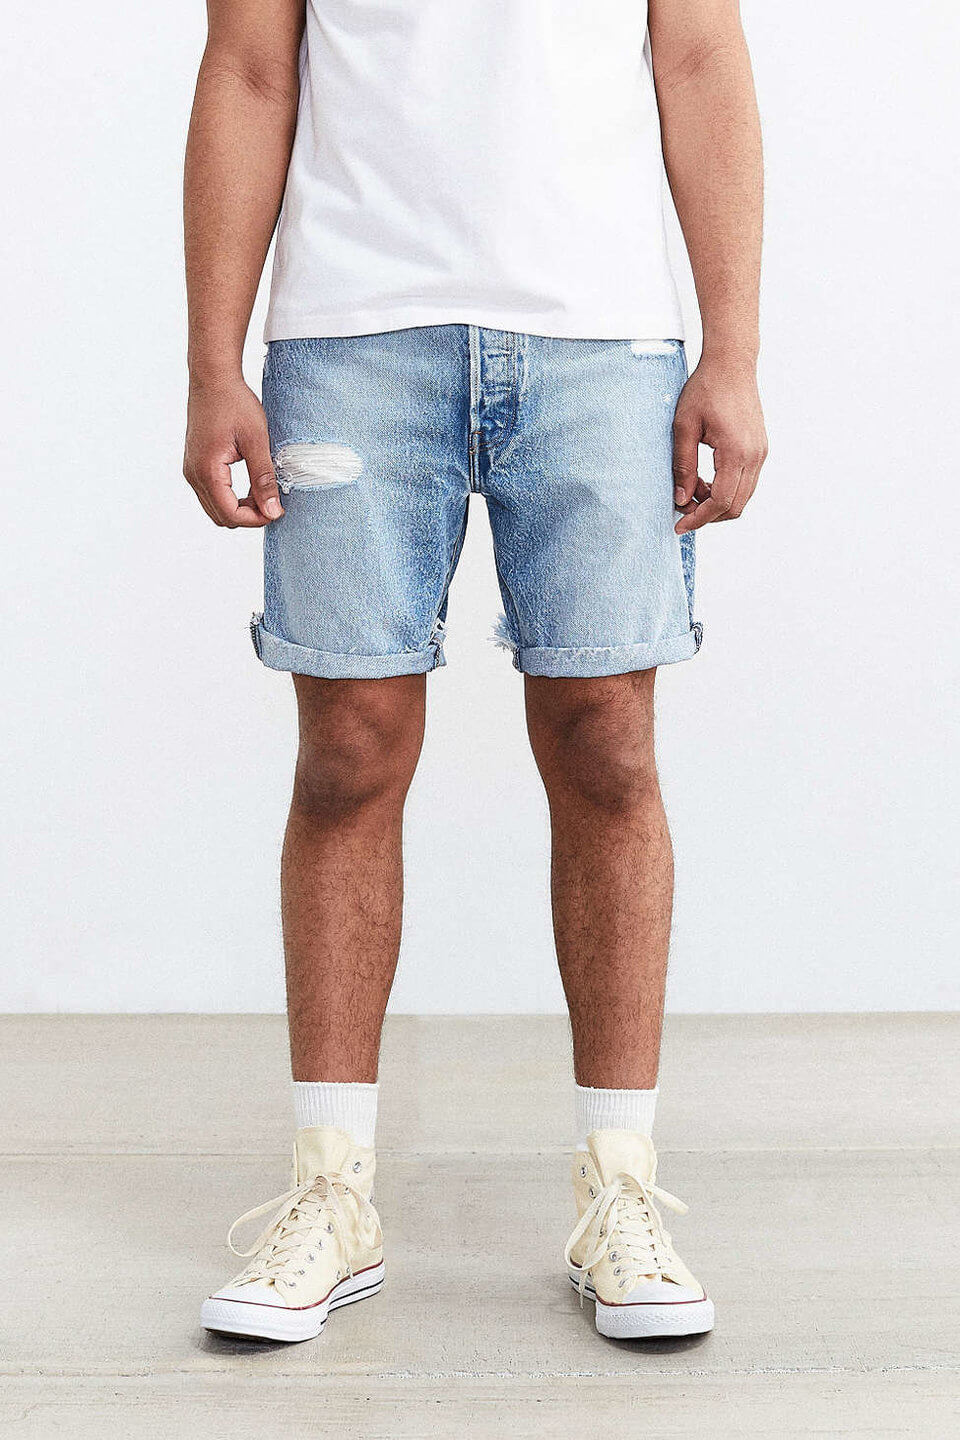 Denim Shorts With Light Colored Sneakers